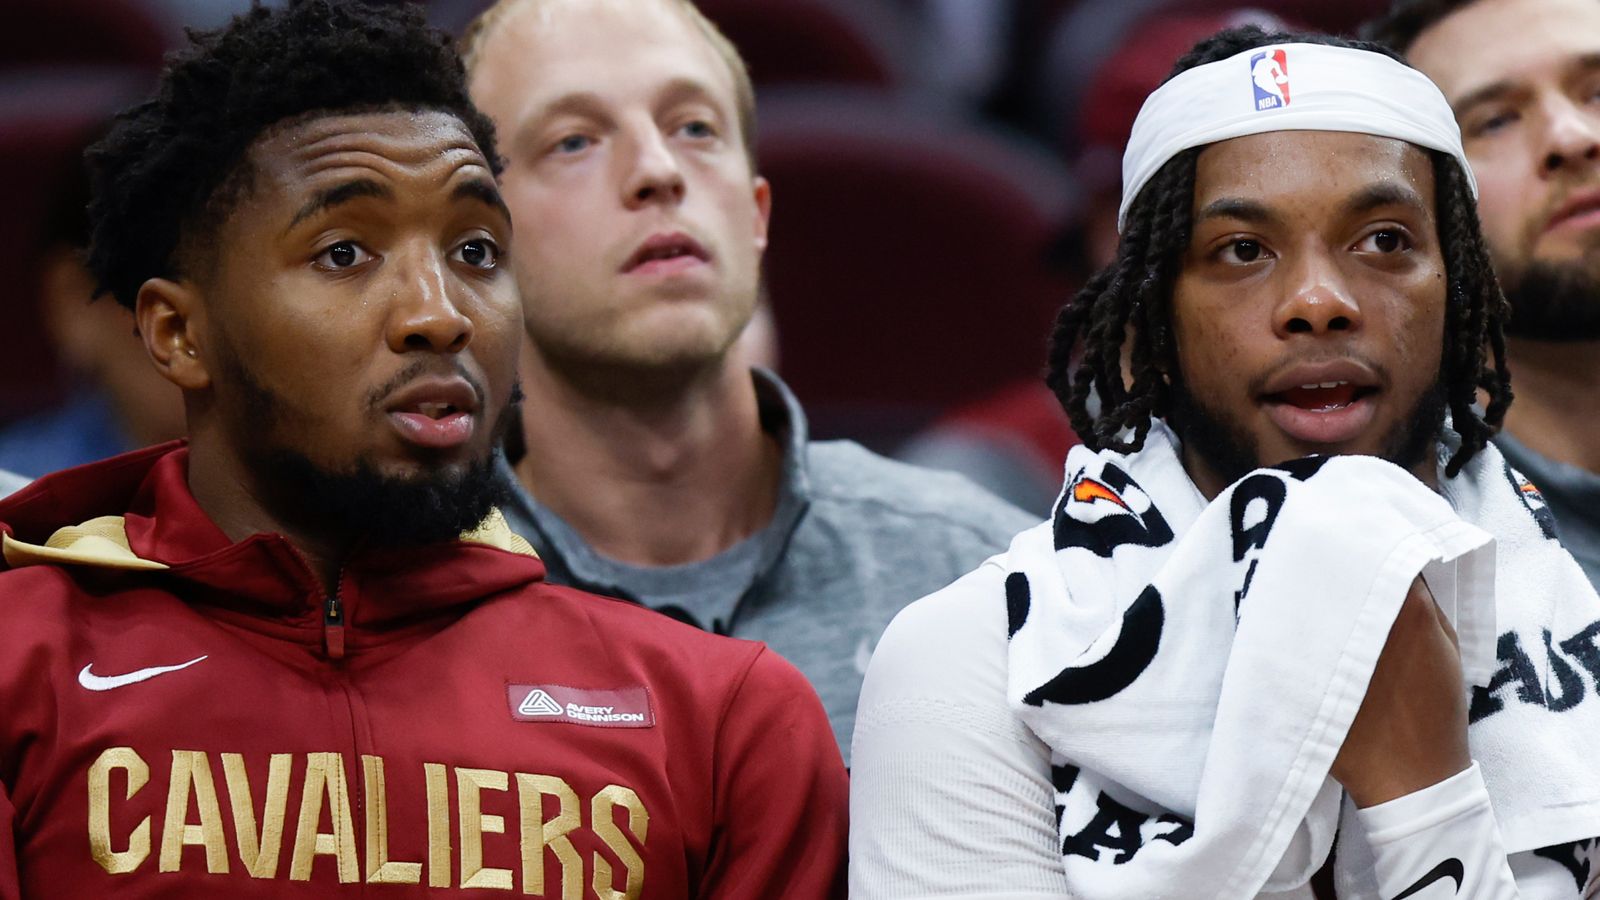 nba-donovan-mitchell-and-darius-garland-among-six-new-duos-to-watch-during-the-2022-23-season